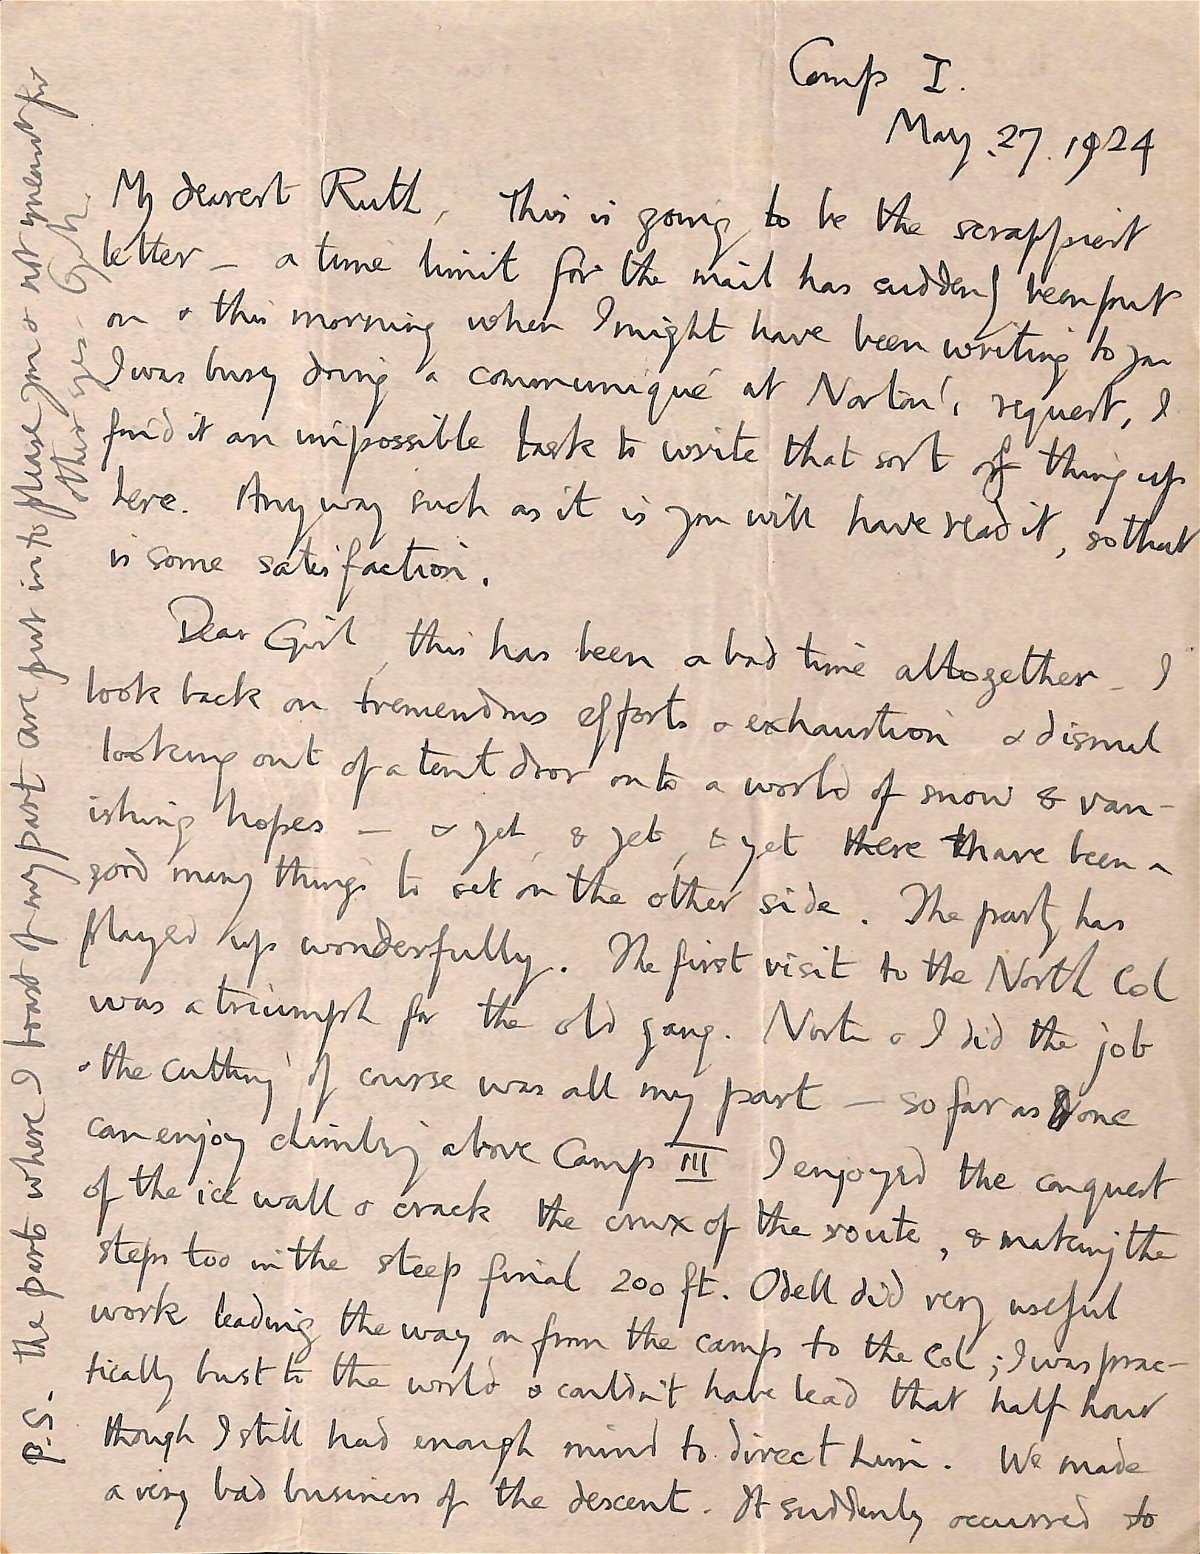 <i>Magdalene College/AP via CNN Newsource</i><br/>A digitized letter shows part of the final correspondence that Mallory wrote to his wife